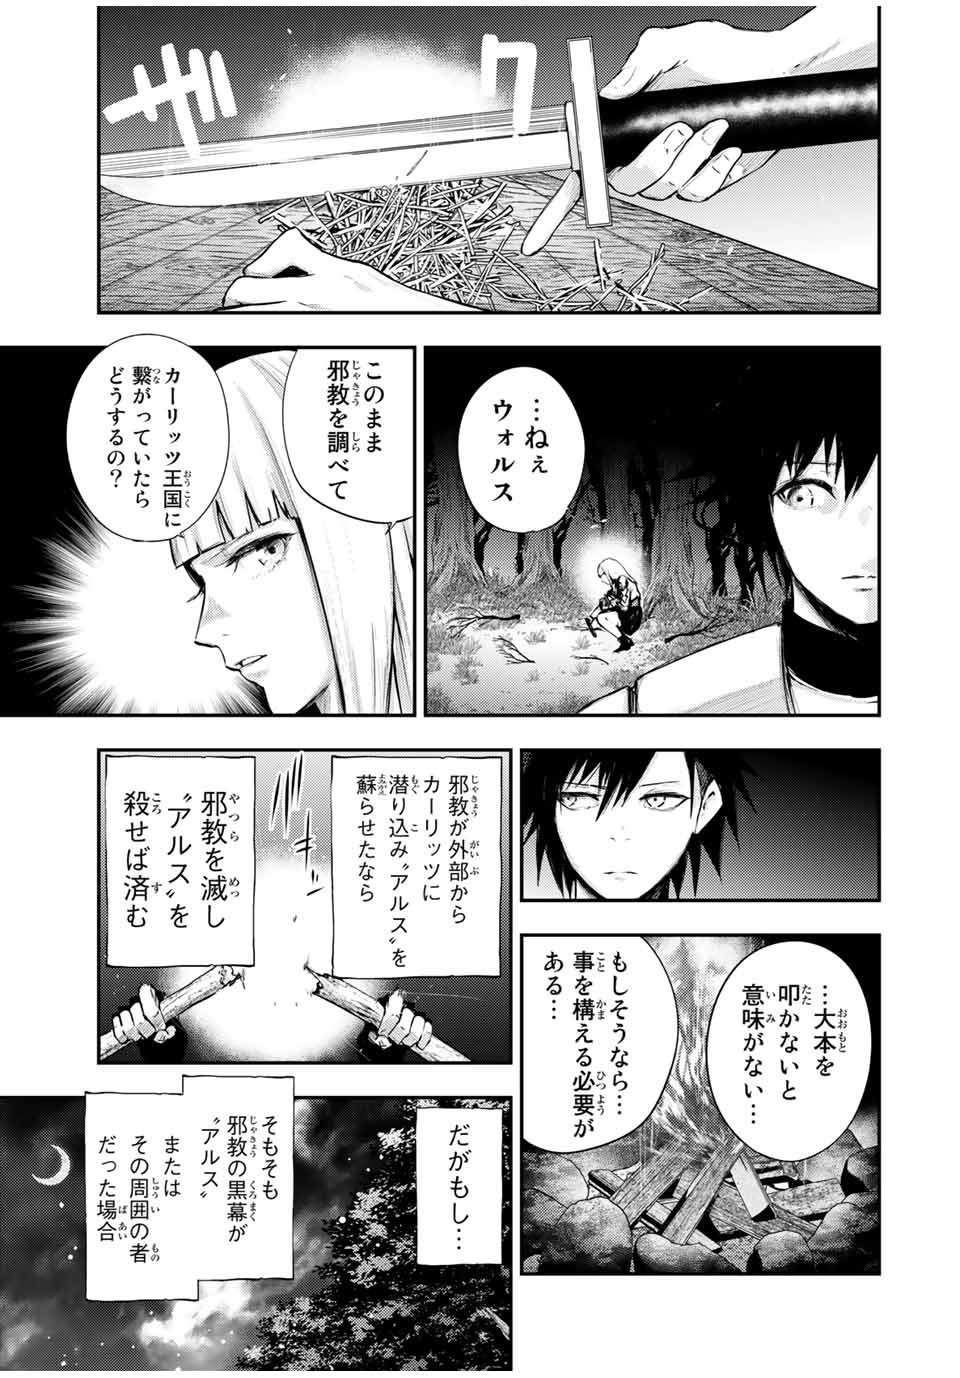 the strongest former prince-; 奴隷転生 ～その奴隷、最強の元王子につき～ 第27話 - Page 3